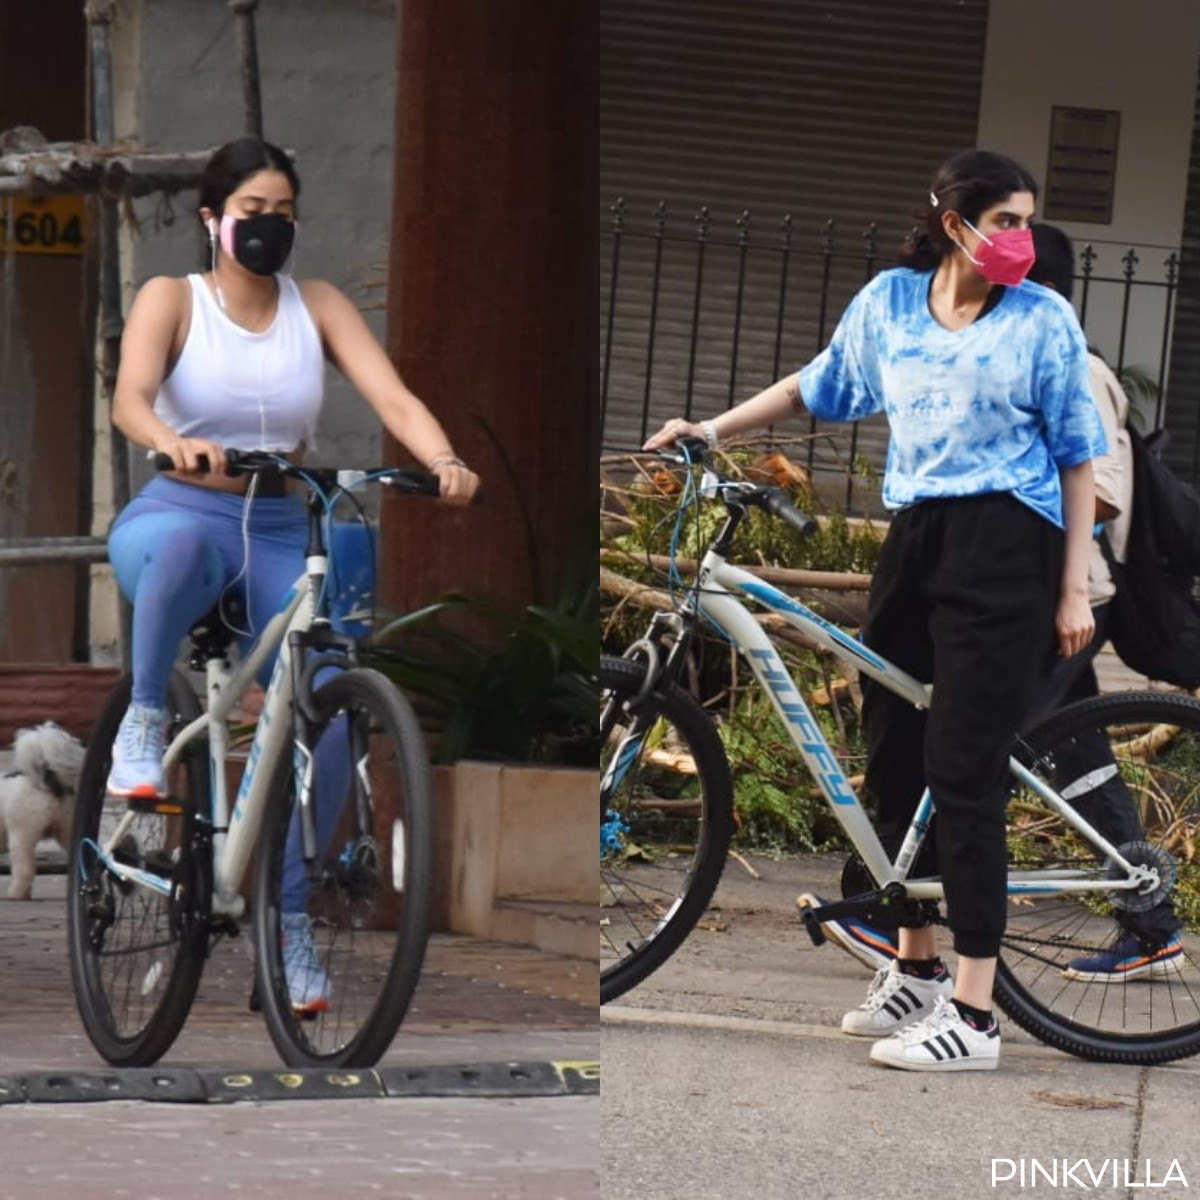 PICS: Janhvi Kapoor looks chic in white and blue as she steps out for cycling with sister Khushi in the city